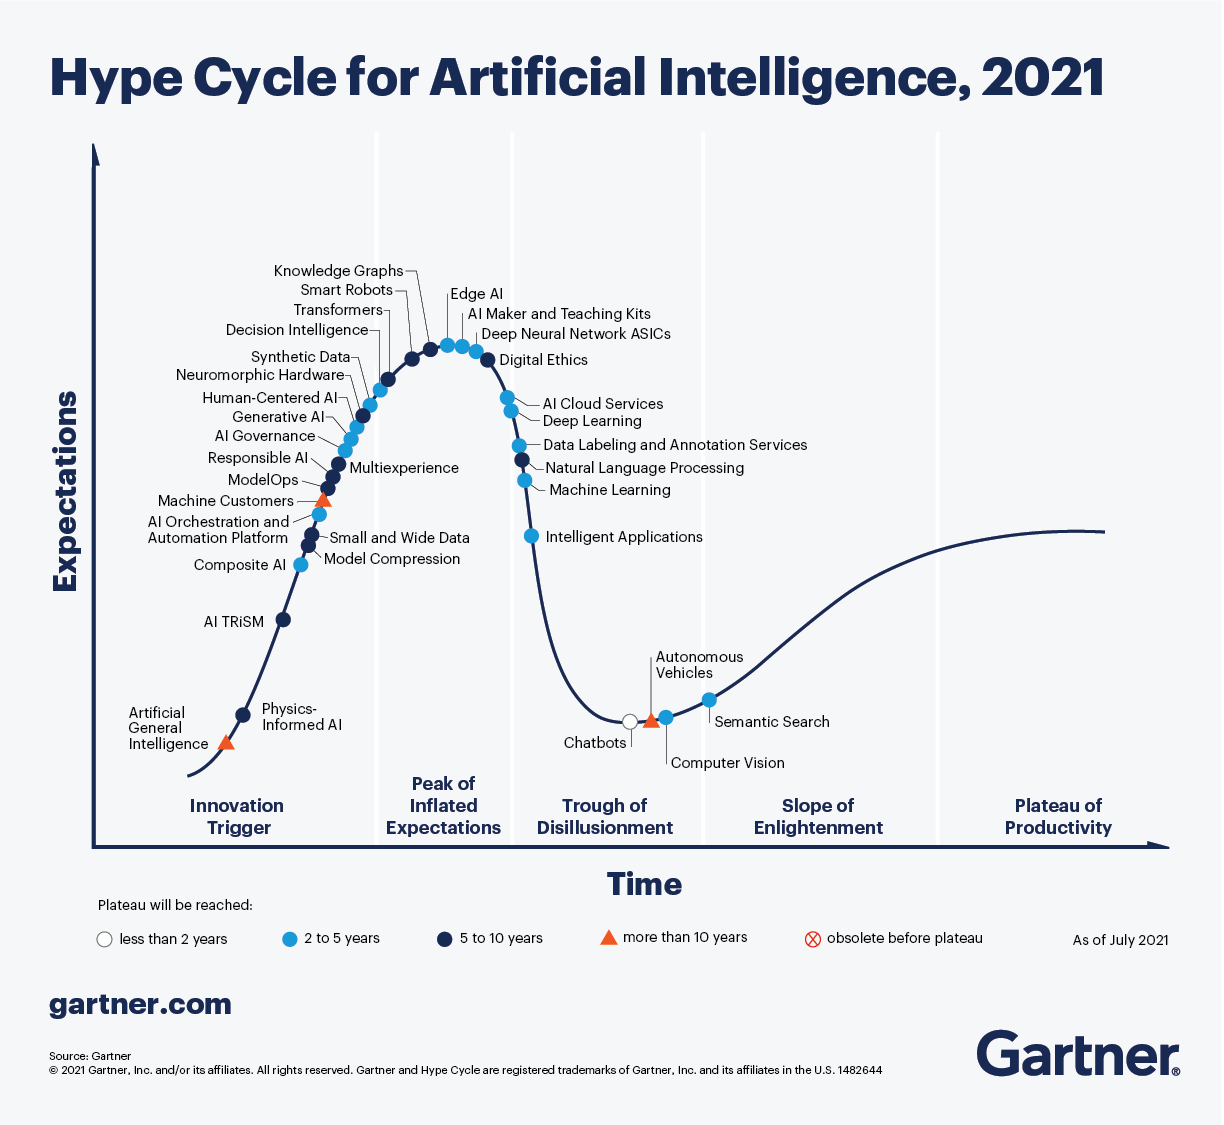 Gartner Artificial Intelligence Hype Cycle for 2021 describes AI-specific innovations that are in various phases of maturation, adoption and hype.